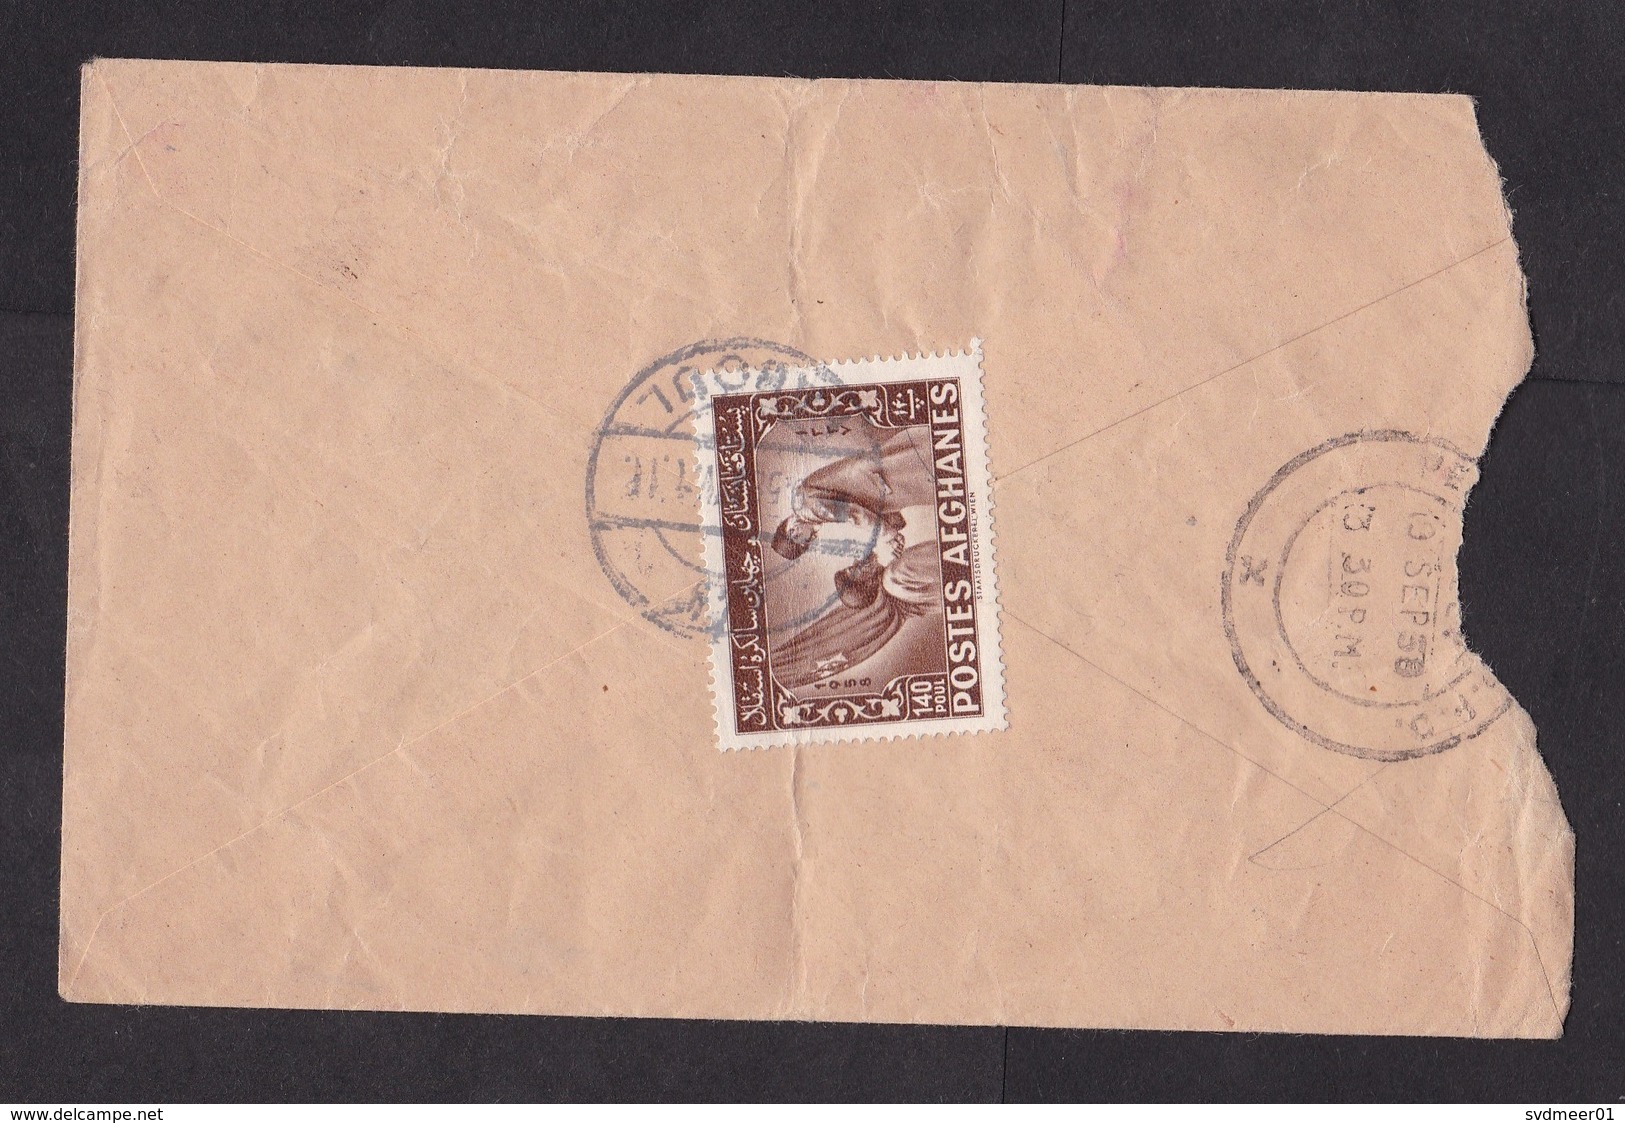 Afghanistan: Cover To Pakistan, 1958, 1 Stamp, Child, Rare Real Use (damaged) - Afghanistan